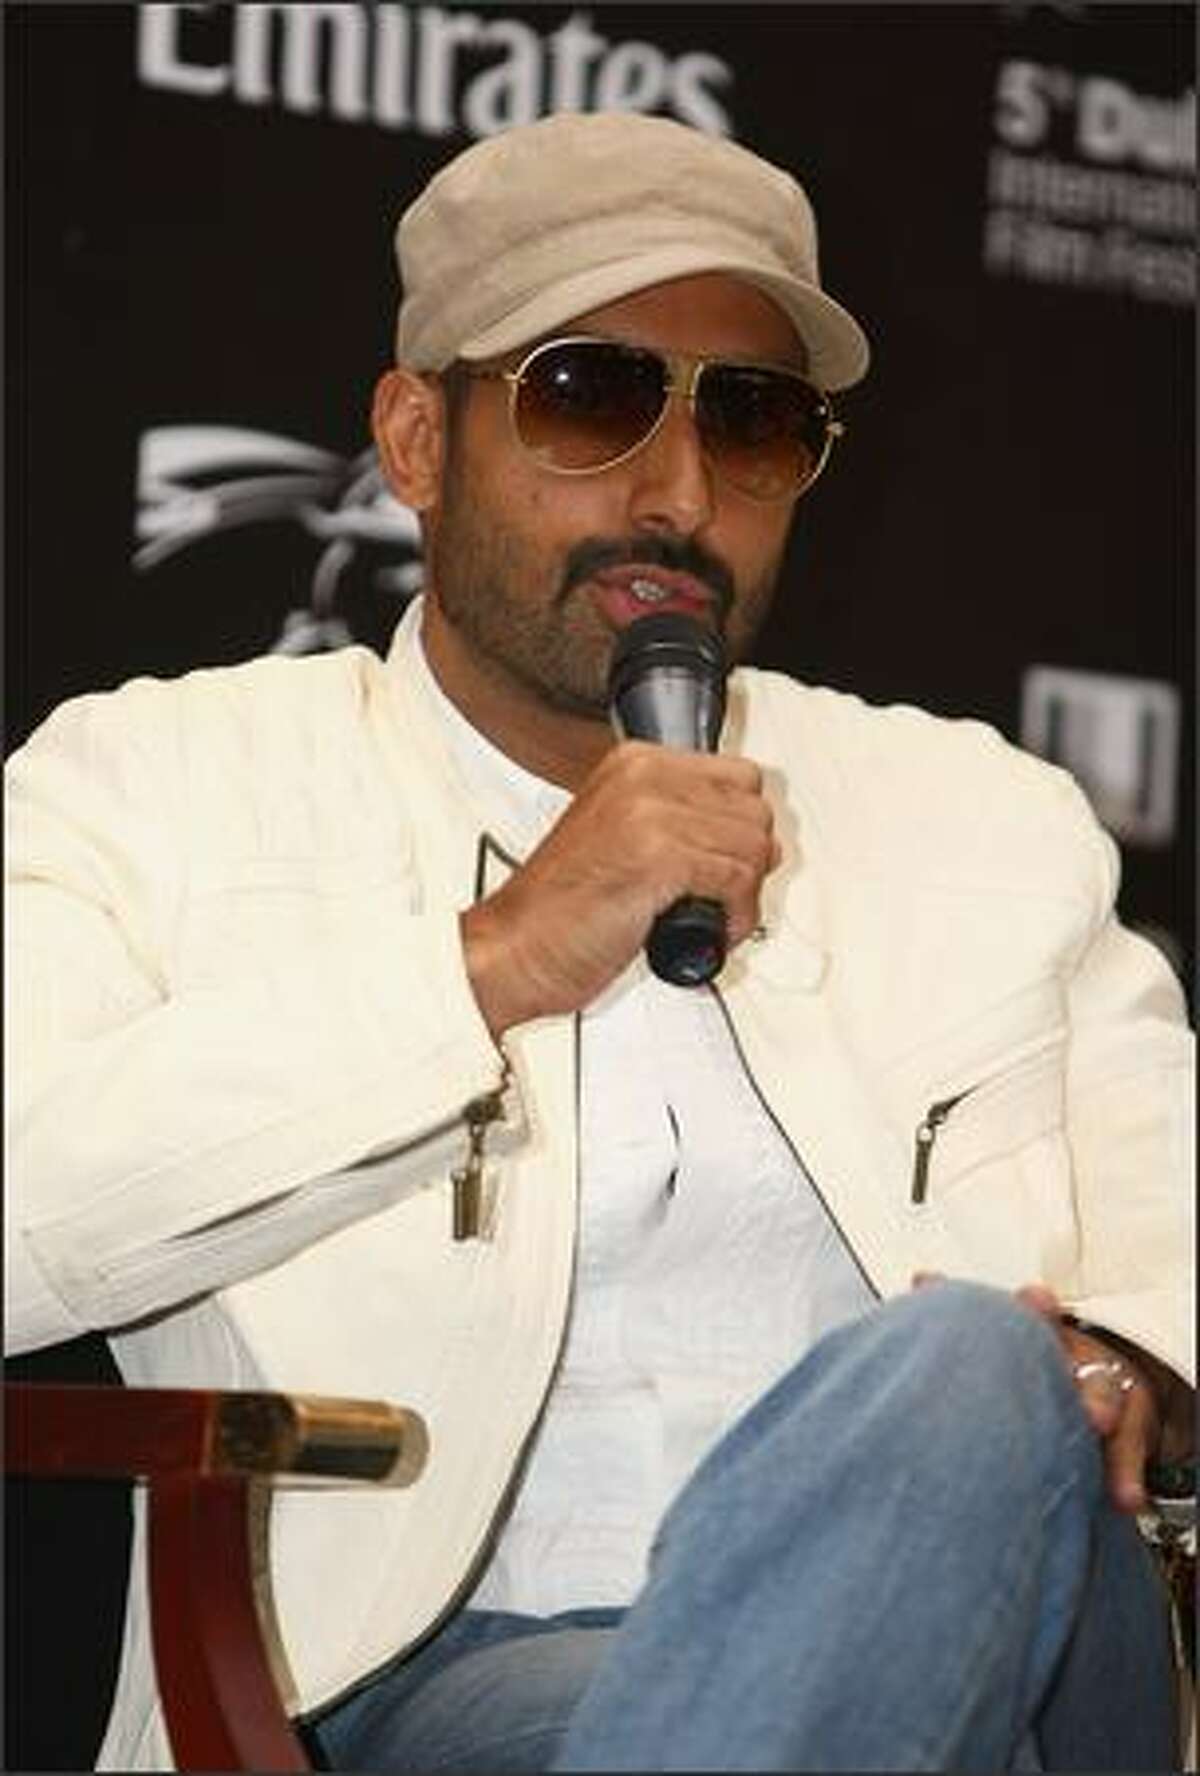 Actor Abhishek Bachchan speaks during the "Delhi 6" press conference during day four of The 5th Annual Dubai International Film Festival held at the Madinat Jumeriah Complex on Sunday in Dubai, United Arab Emirates.